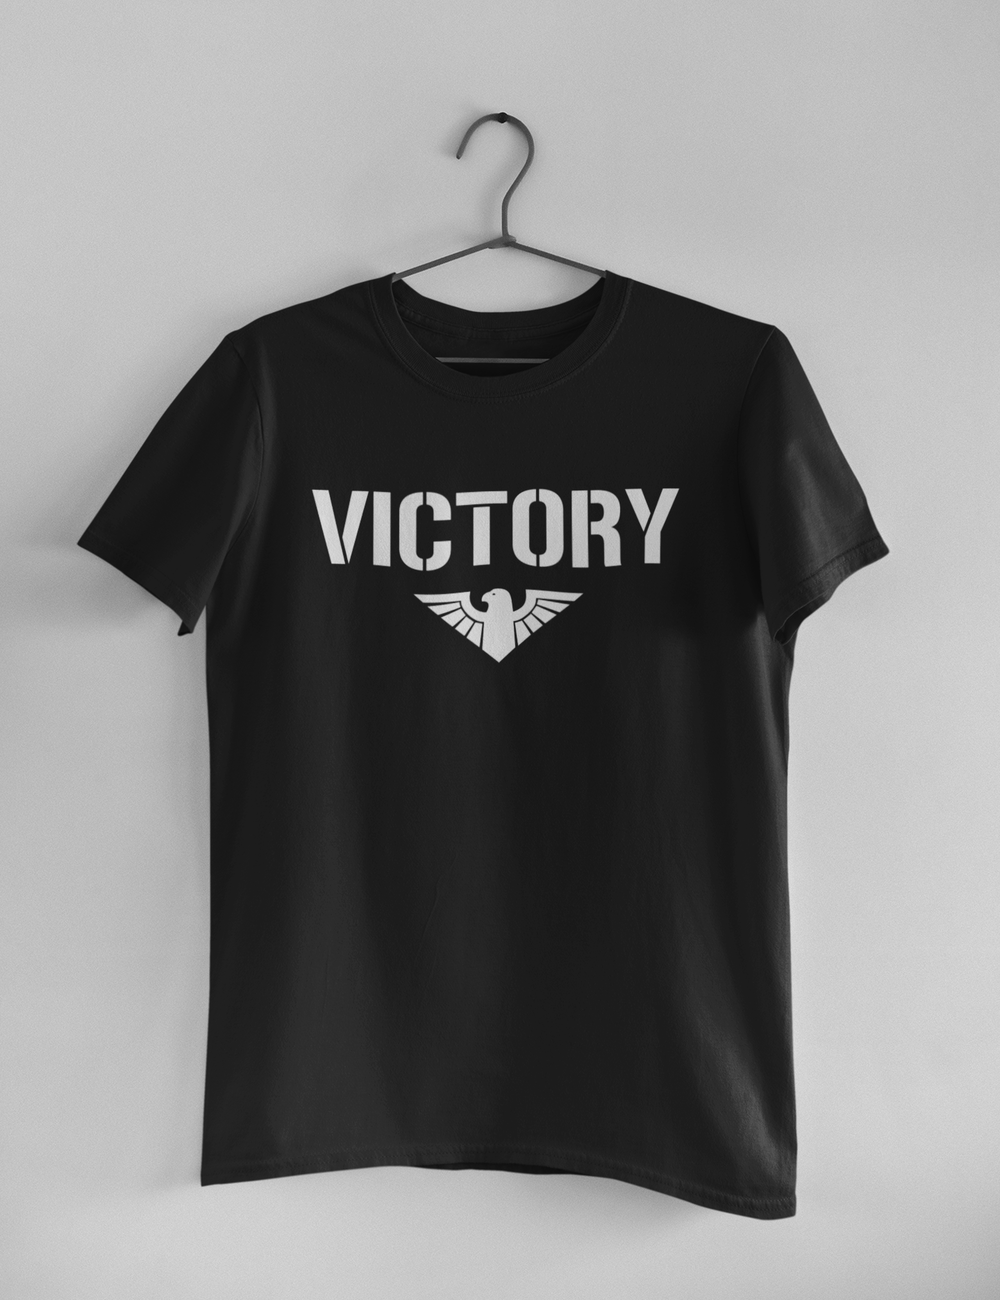 Victory | Men's Fitted T-Shirt OniTakai